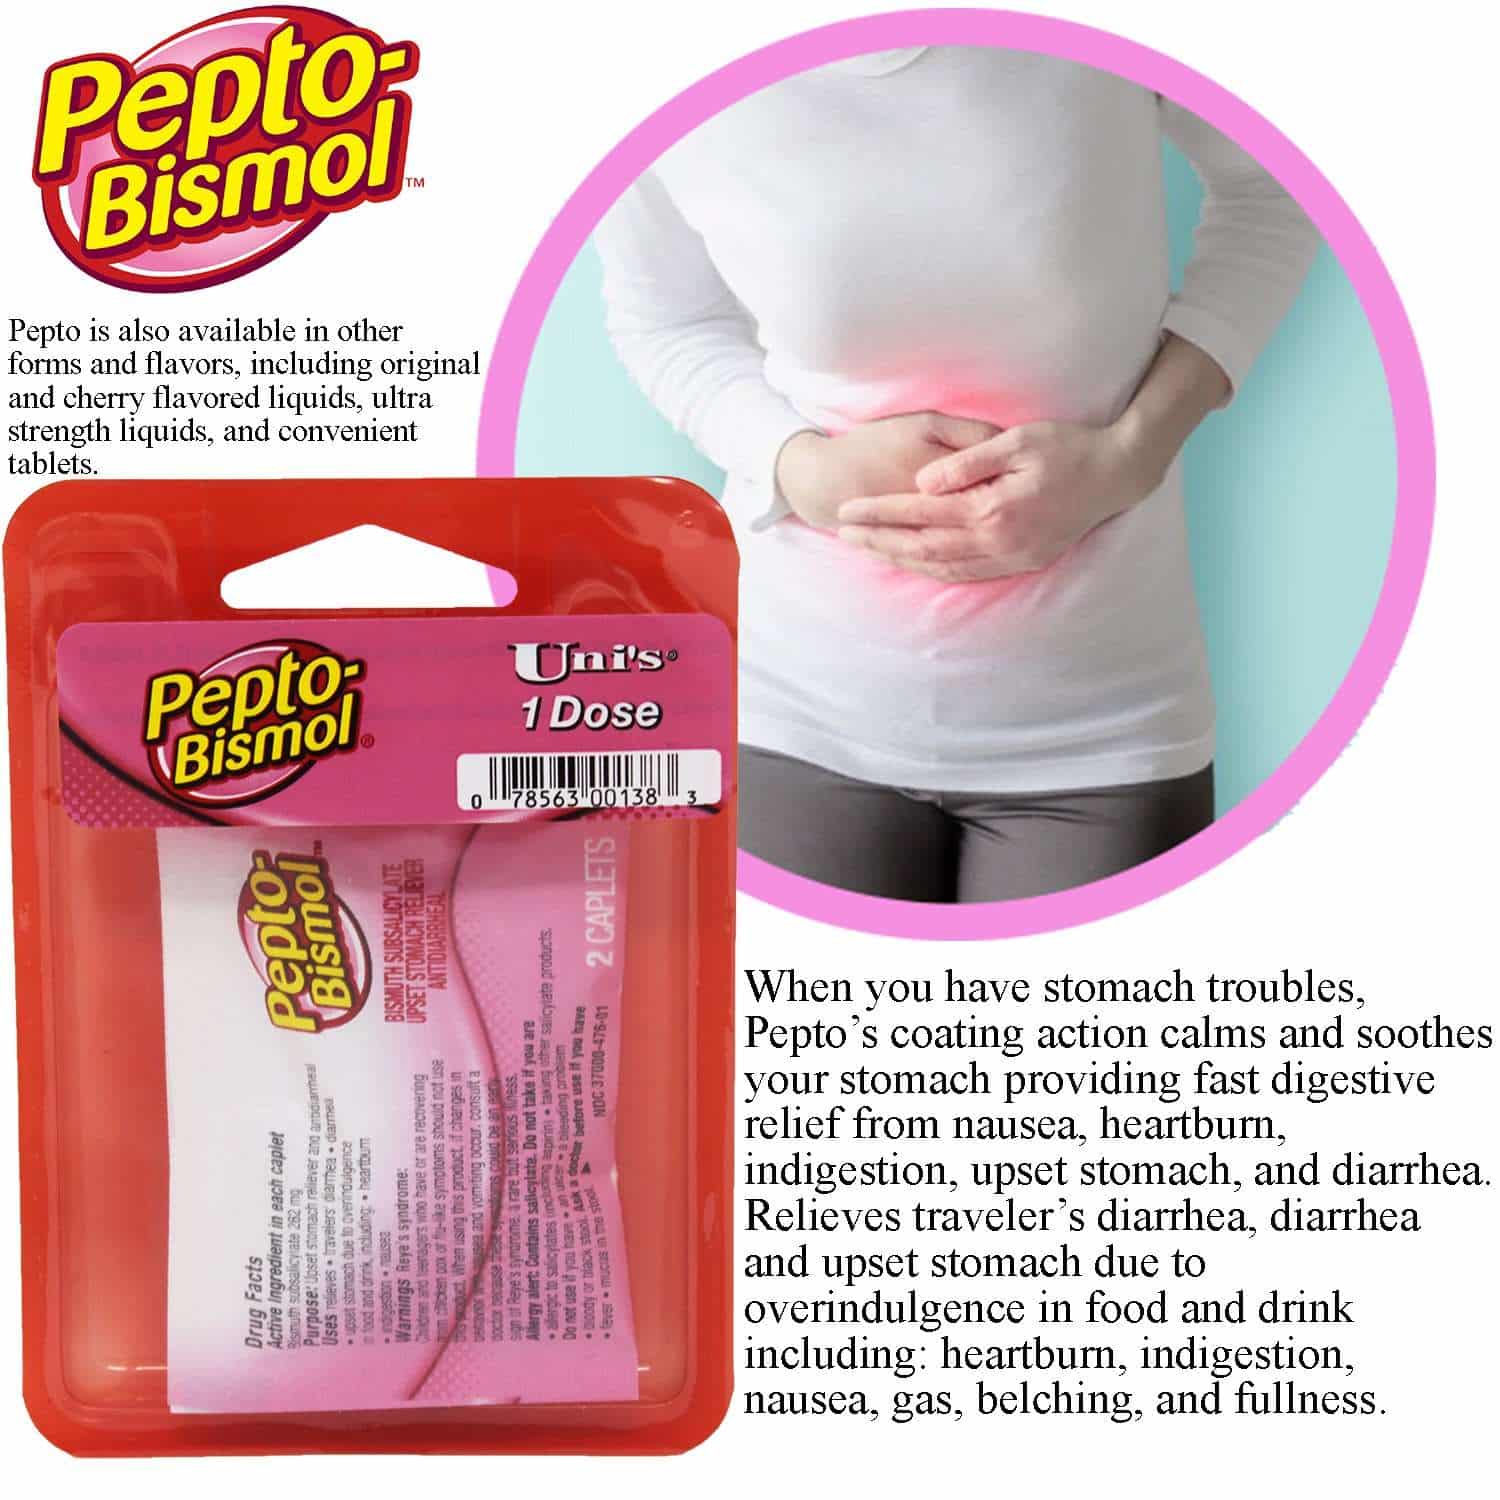 Does Pepto Bismol Help With Gas And Bloating